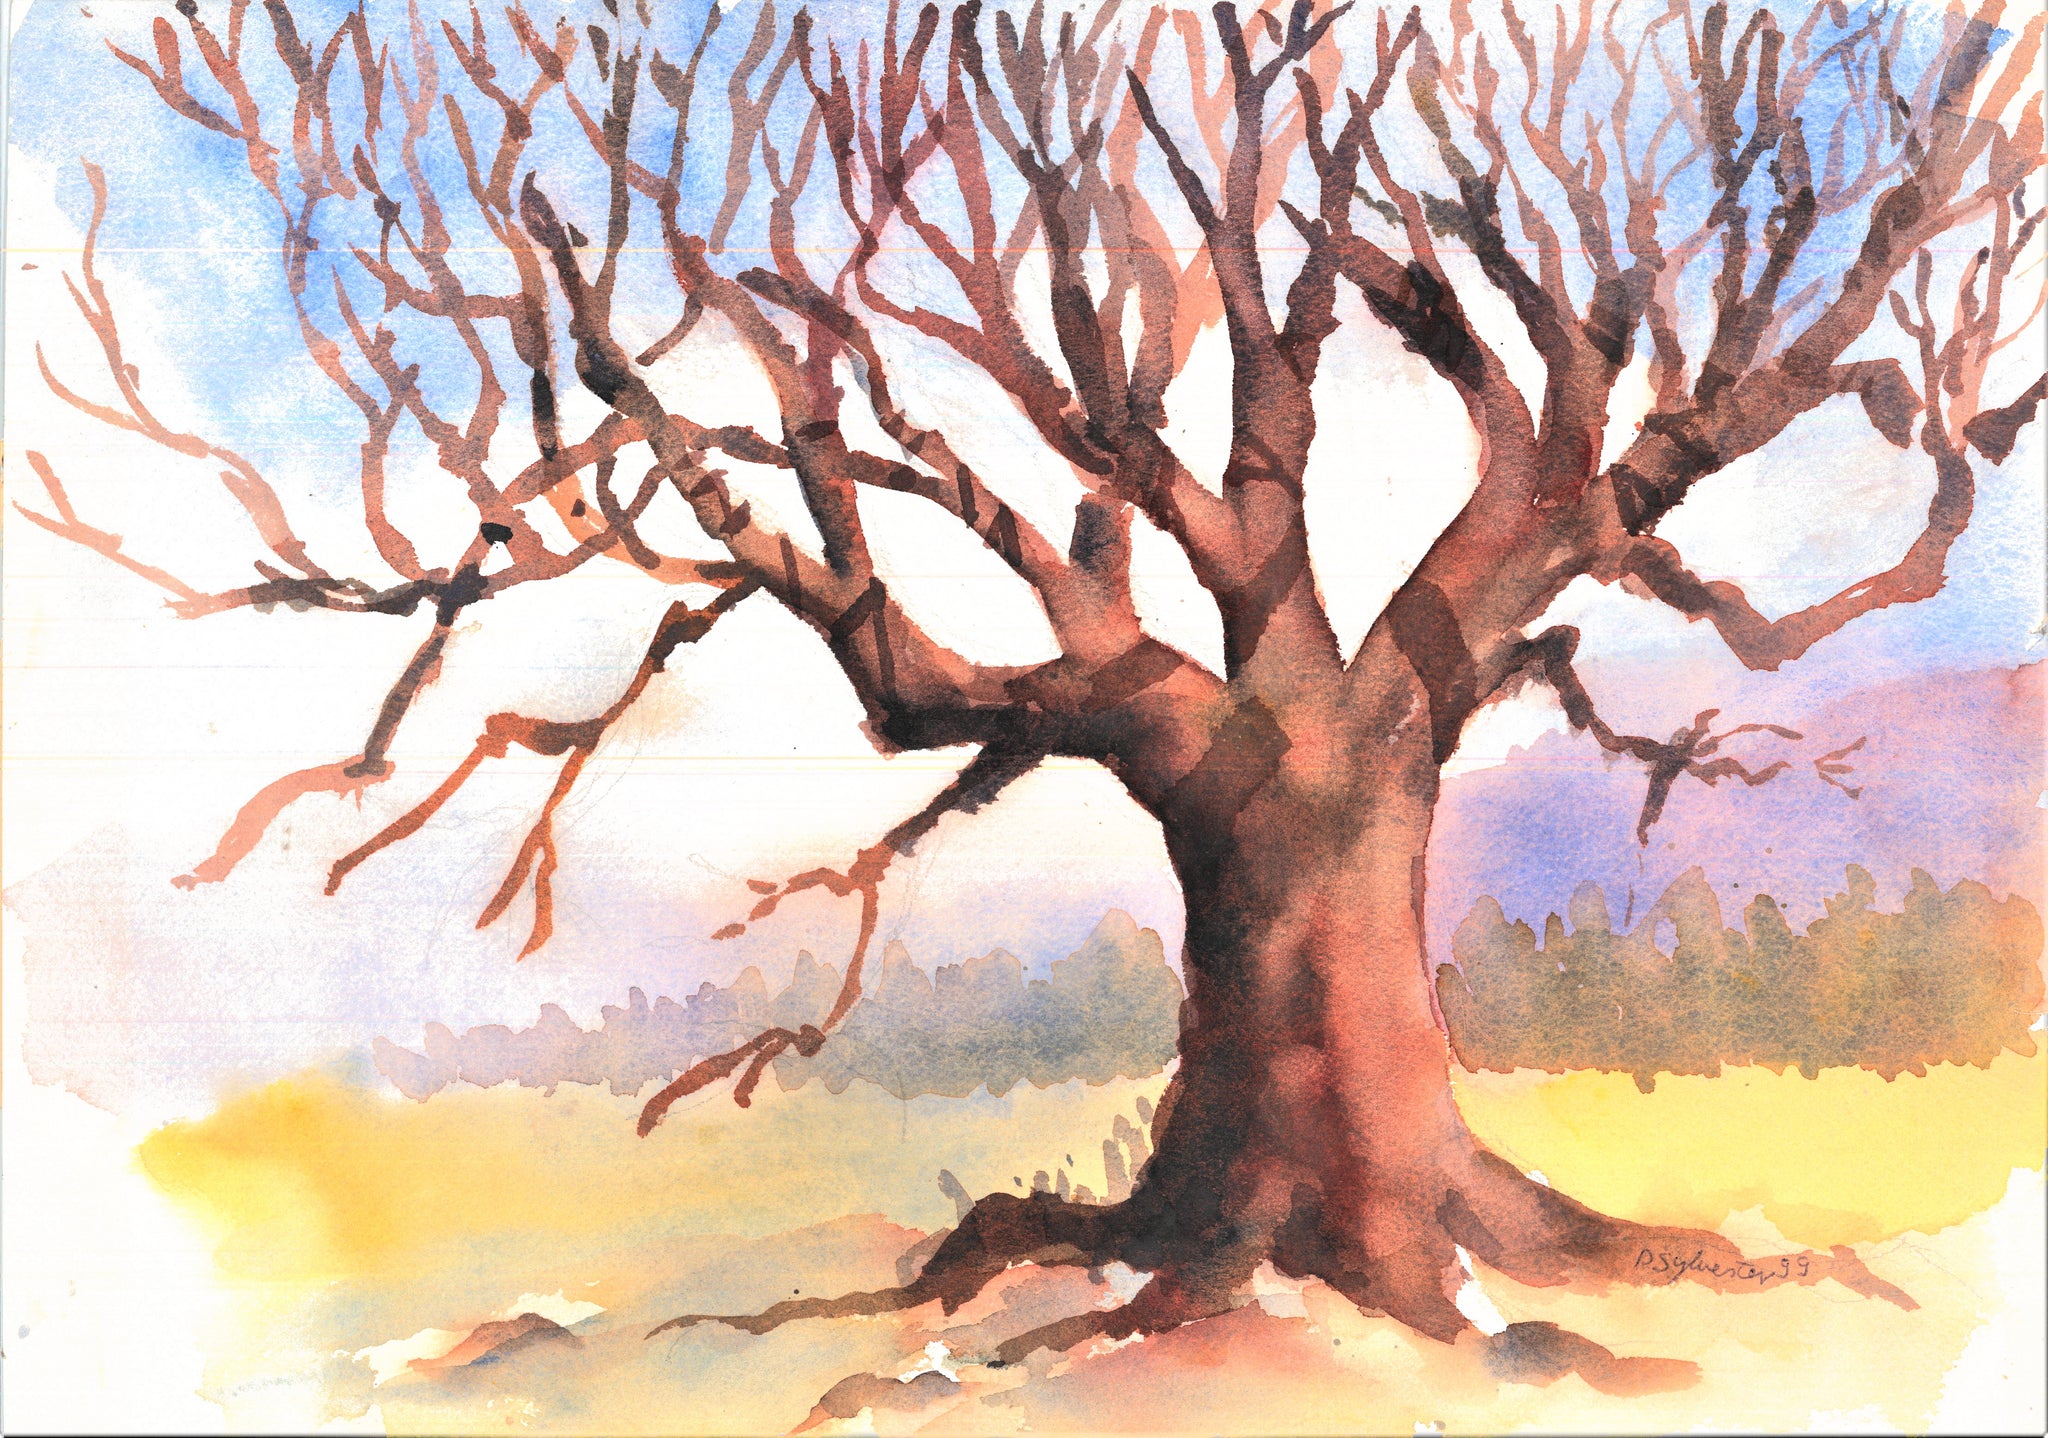 NATURE - TREE IN WINTER- WATERCOLOR BY DON SYLVESTER